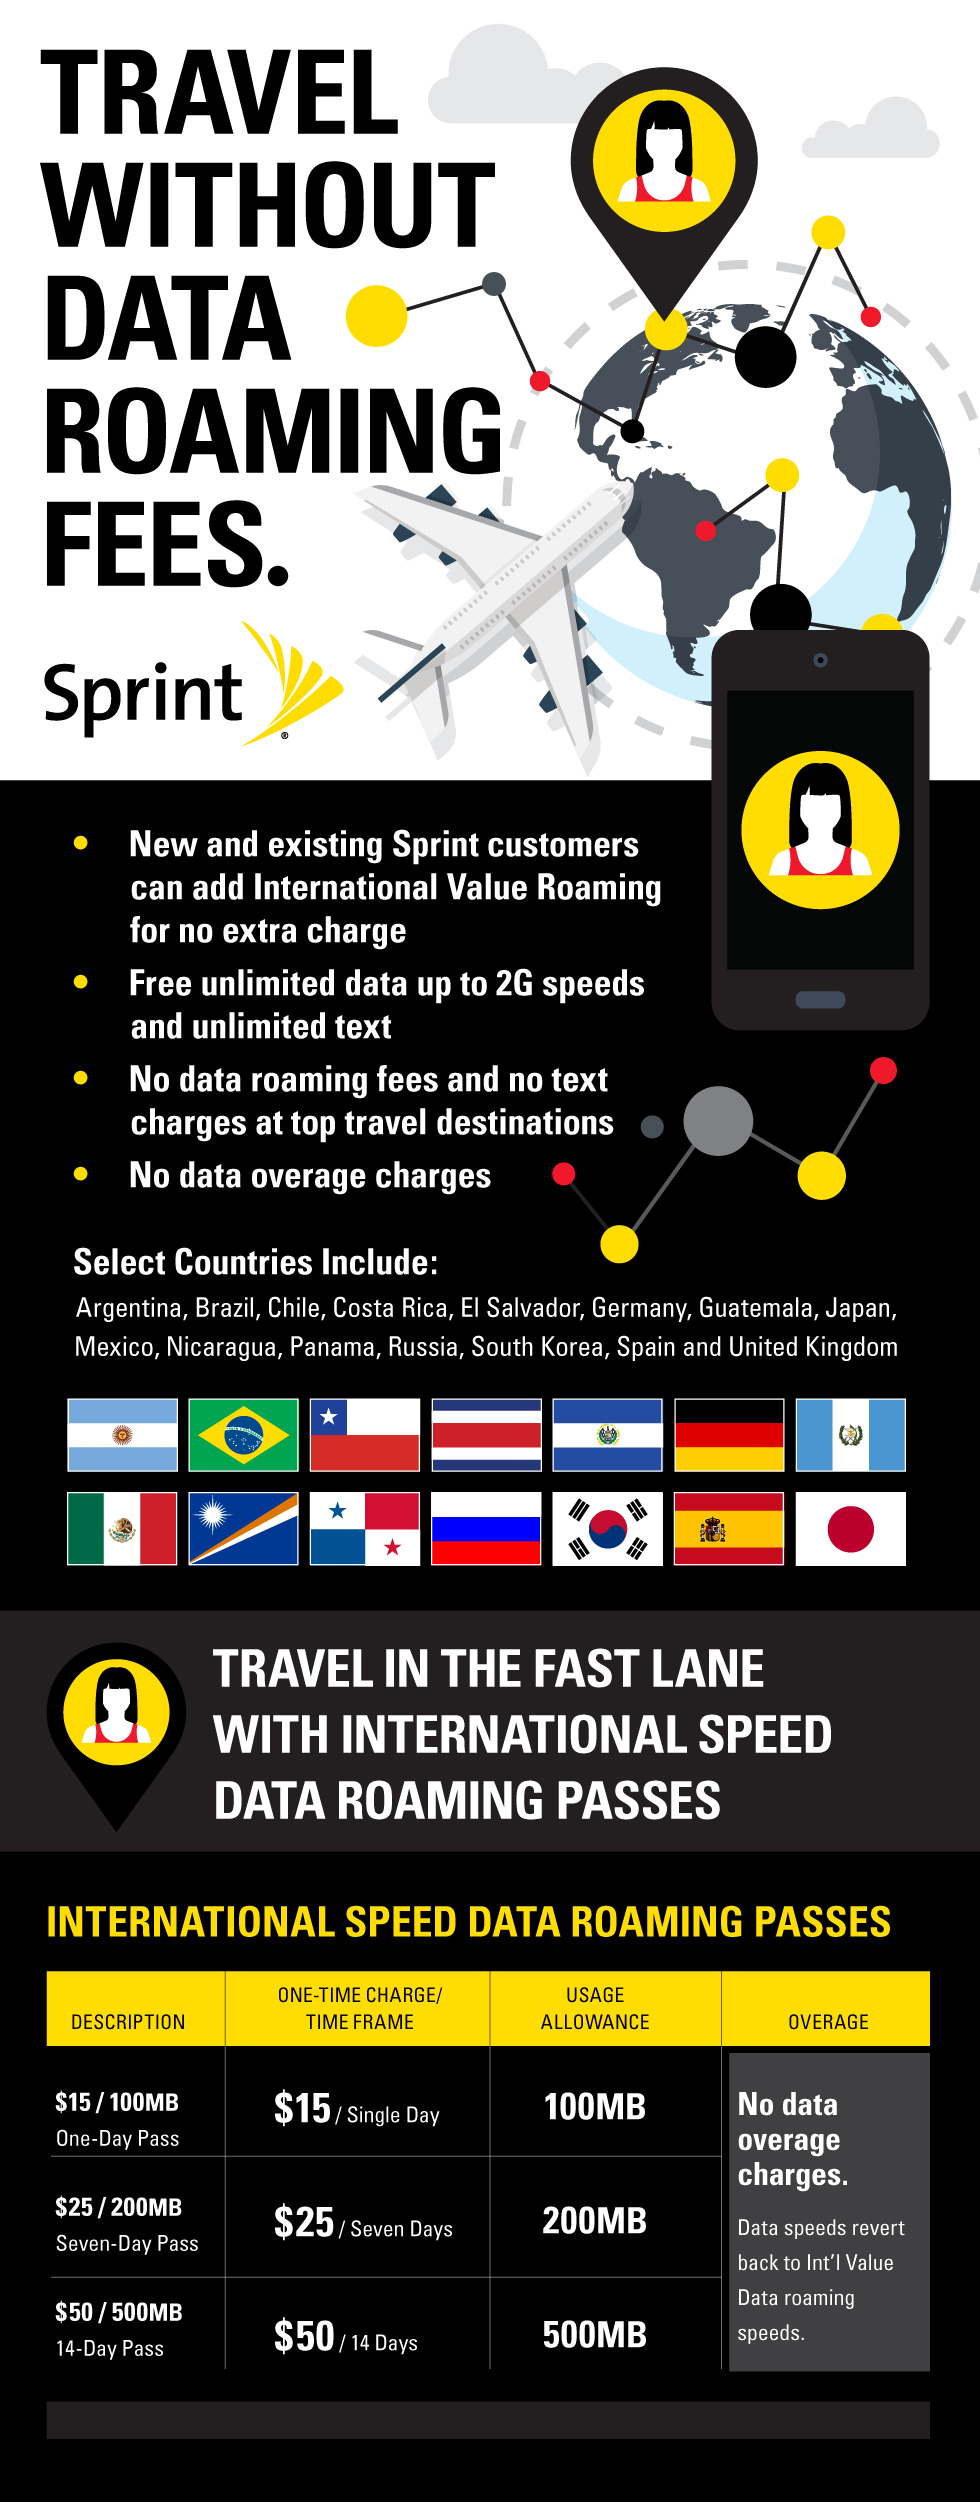 Sprint Offers &#039;Free Unlimited International Roaming&#039; for Customers Traveling to Select Countries